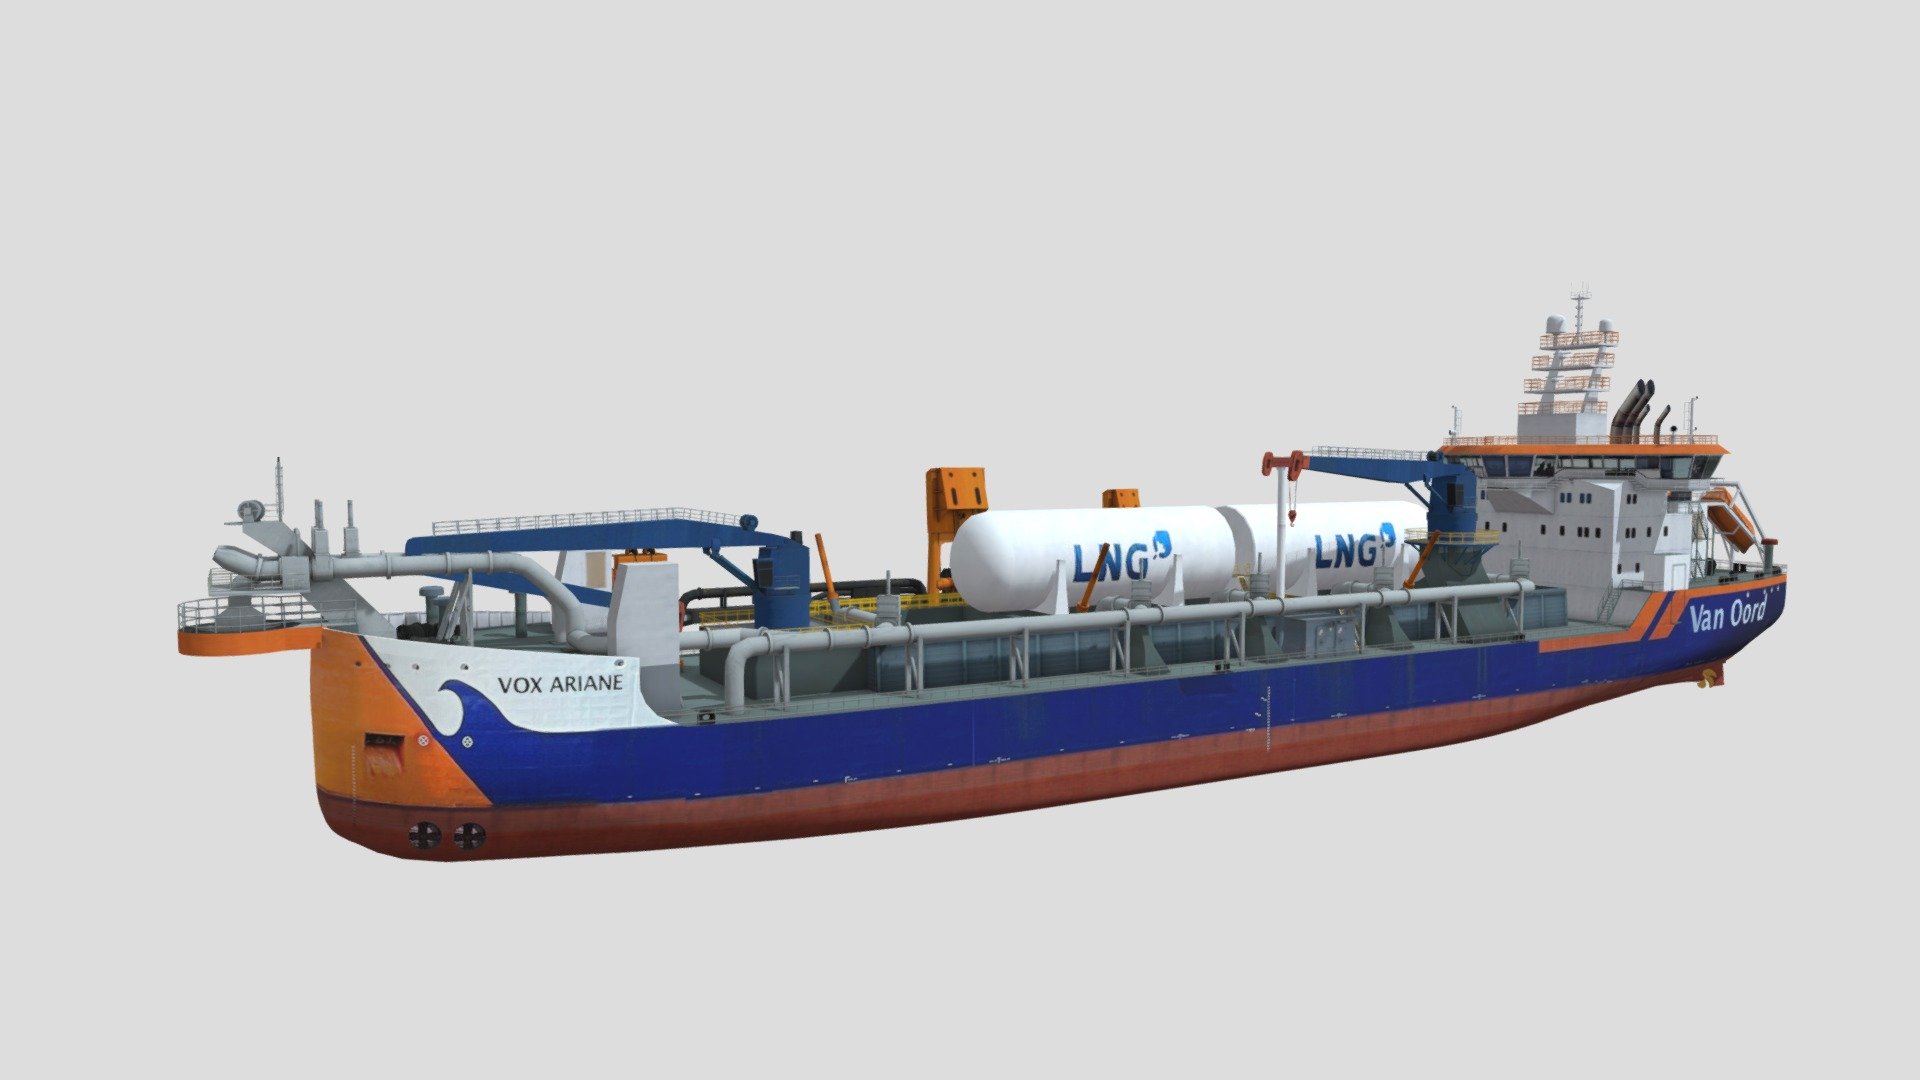 As one of three LNG propelled hoppers (Vox Ariane, Vox Apolonia and Vox Alexia) this trailing hopper suction dredger contributes to Van Oord’s aim of making its fleet state-of-the-art and more energy efficient. 

These vessels will each be equipped with a suction pipe with submerged e-driven dredge pump, two shore discharge dredge pumps, five bottom doors, and a total installed power of 14,500 kW. They will have accommodation for 22 persons. 
The vessels will obtain a Green Passport and Clean Ship Notation 3d model